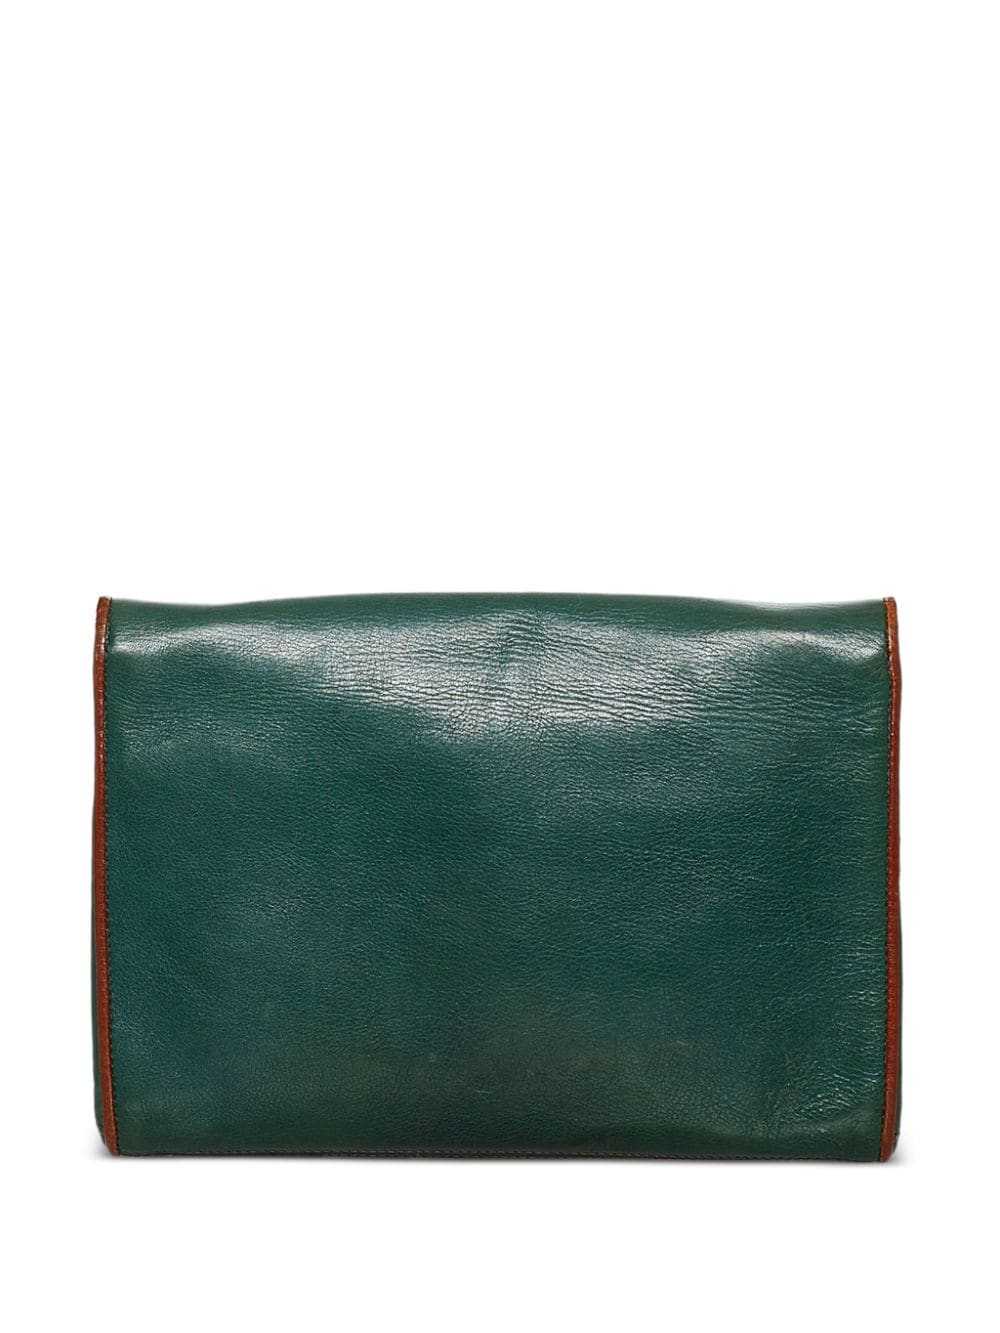 Céline Pre-Owned Leather clutch bag - Green - image 2